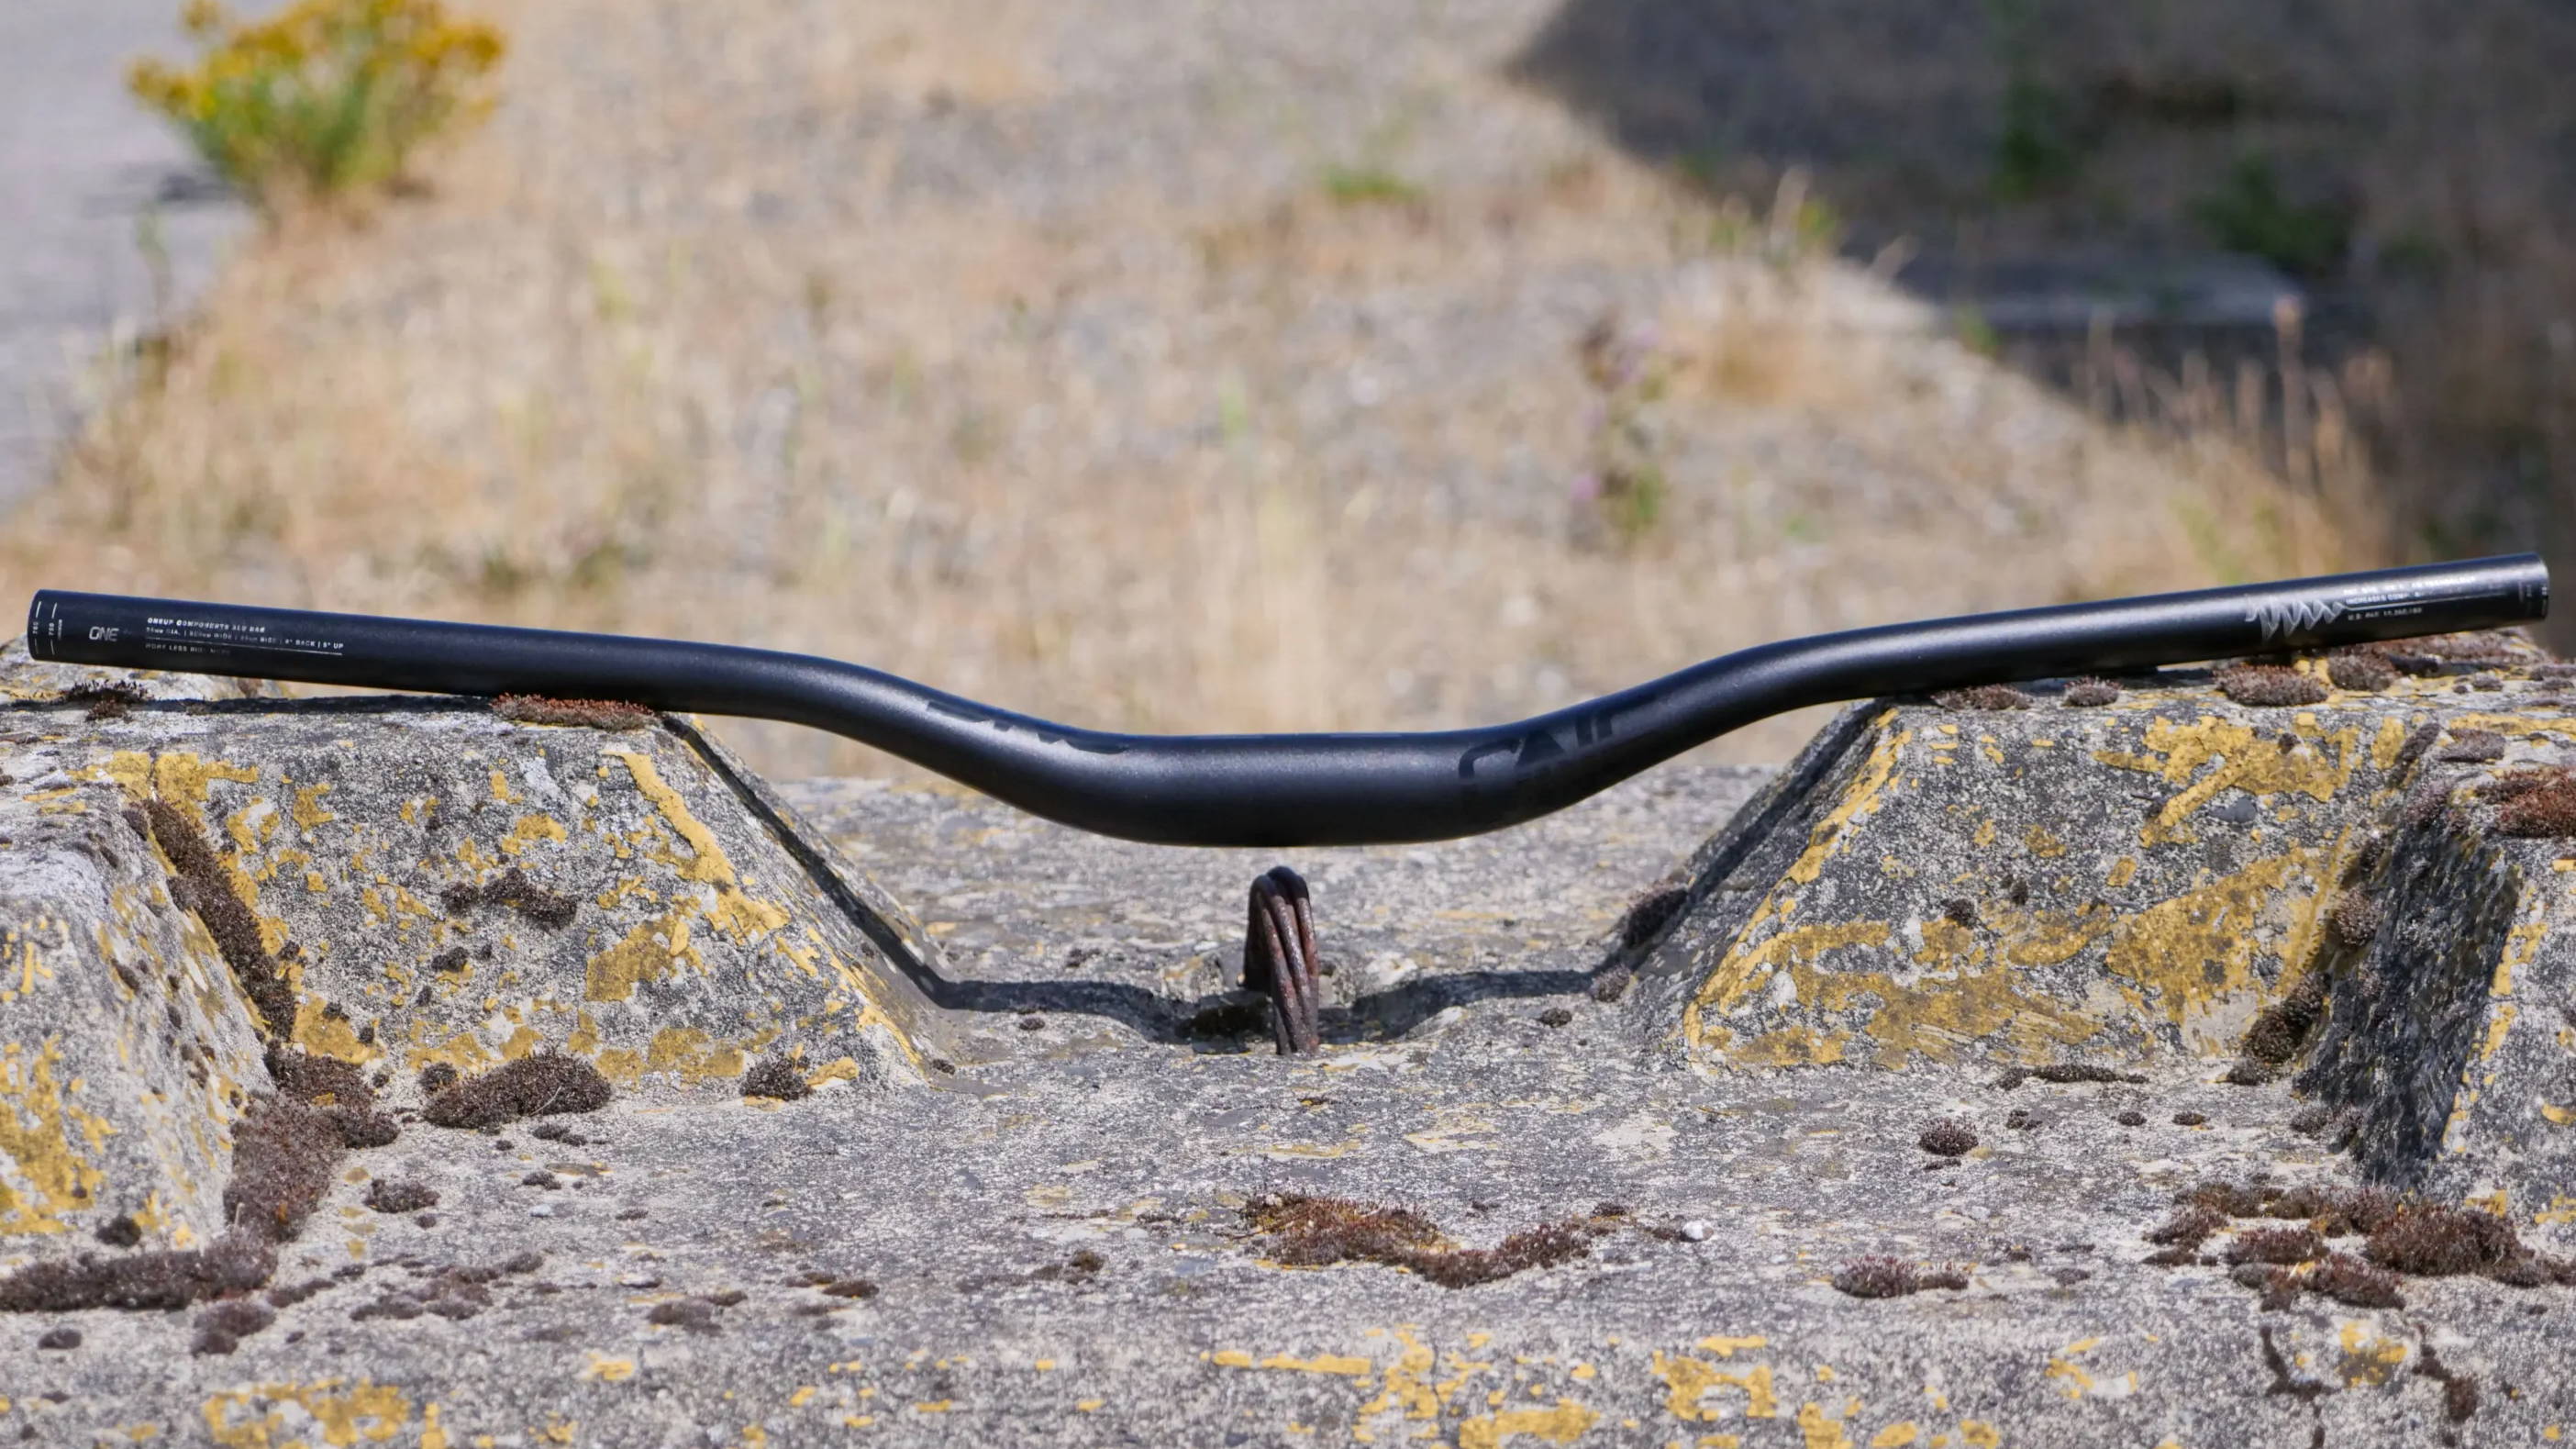 oneup components aluminum handlebars set on a concrete jersey barrier